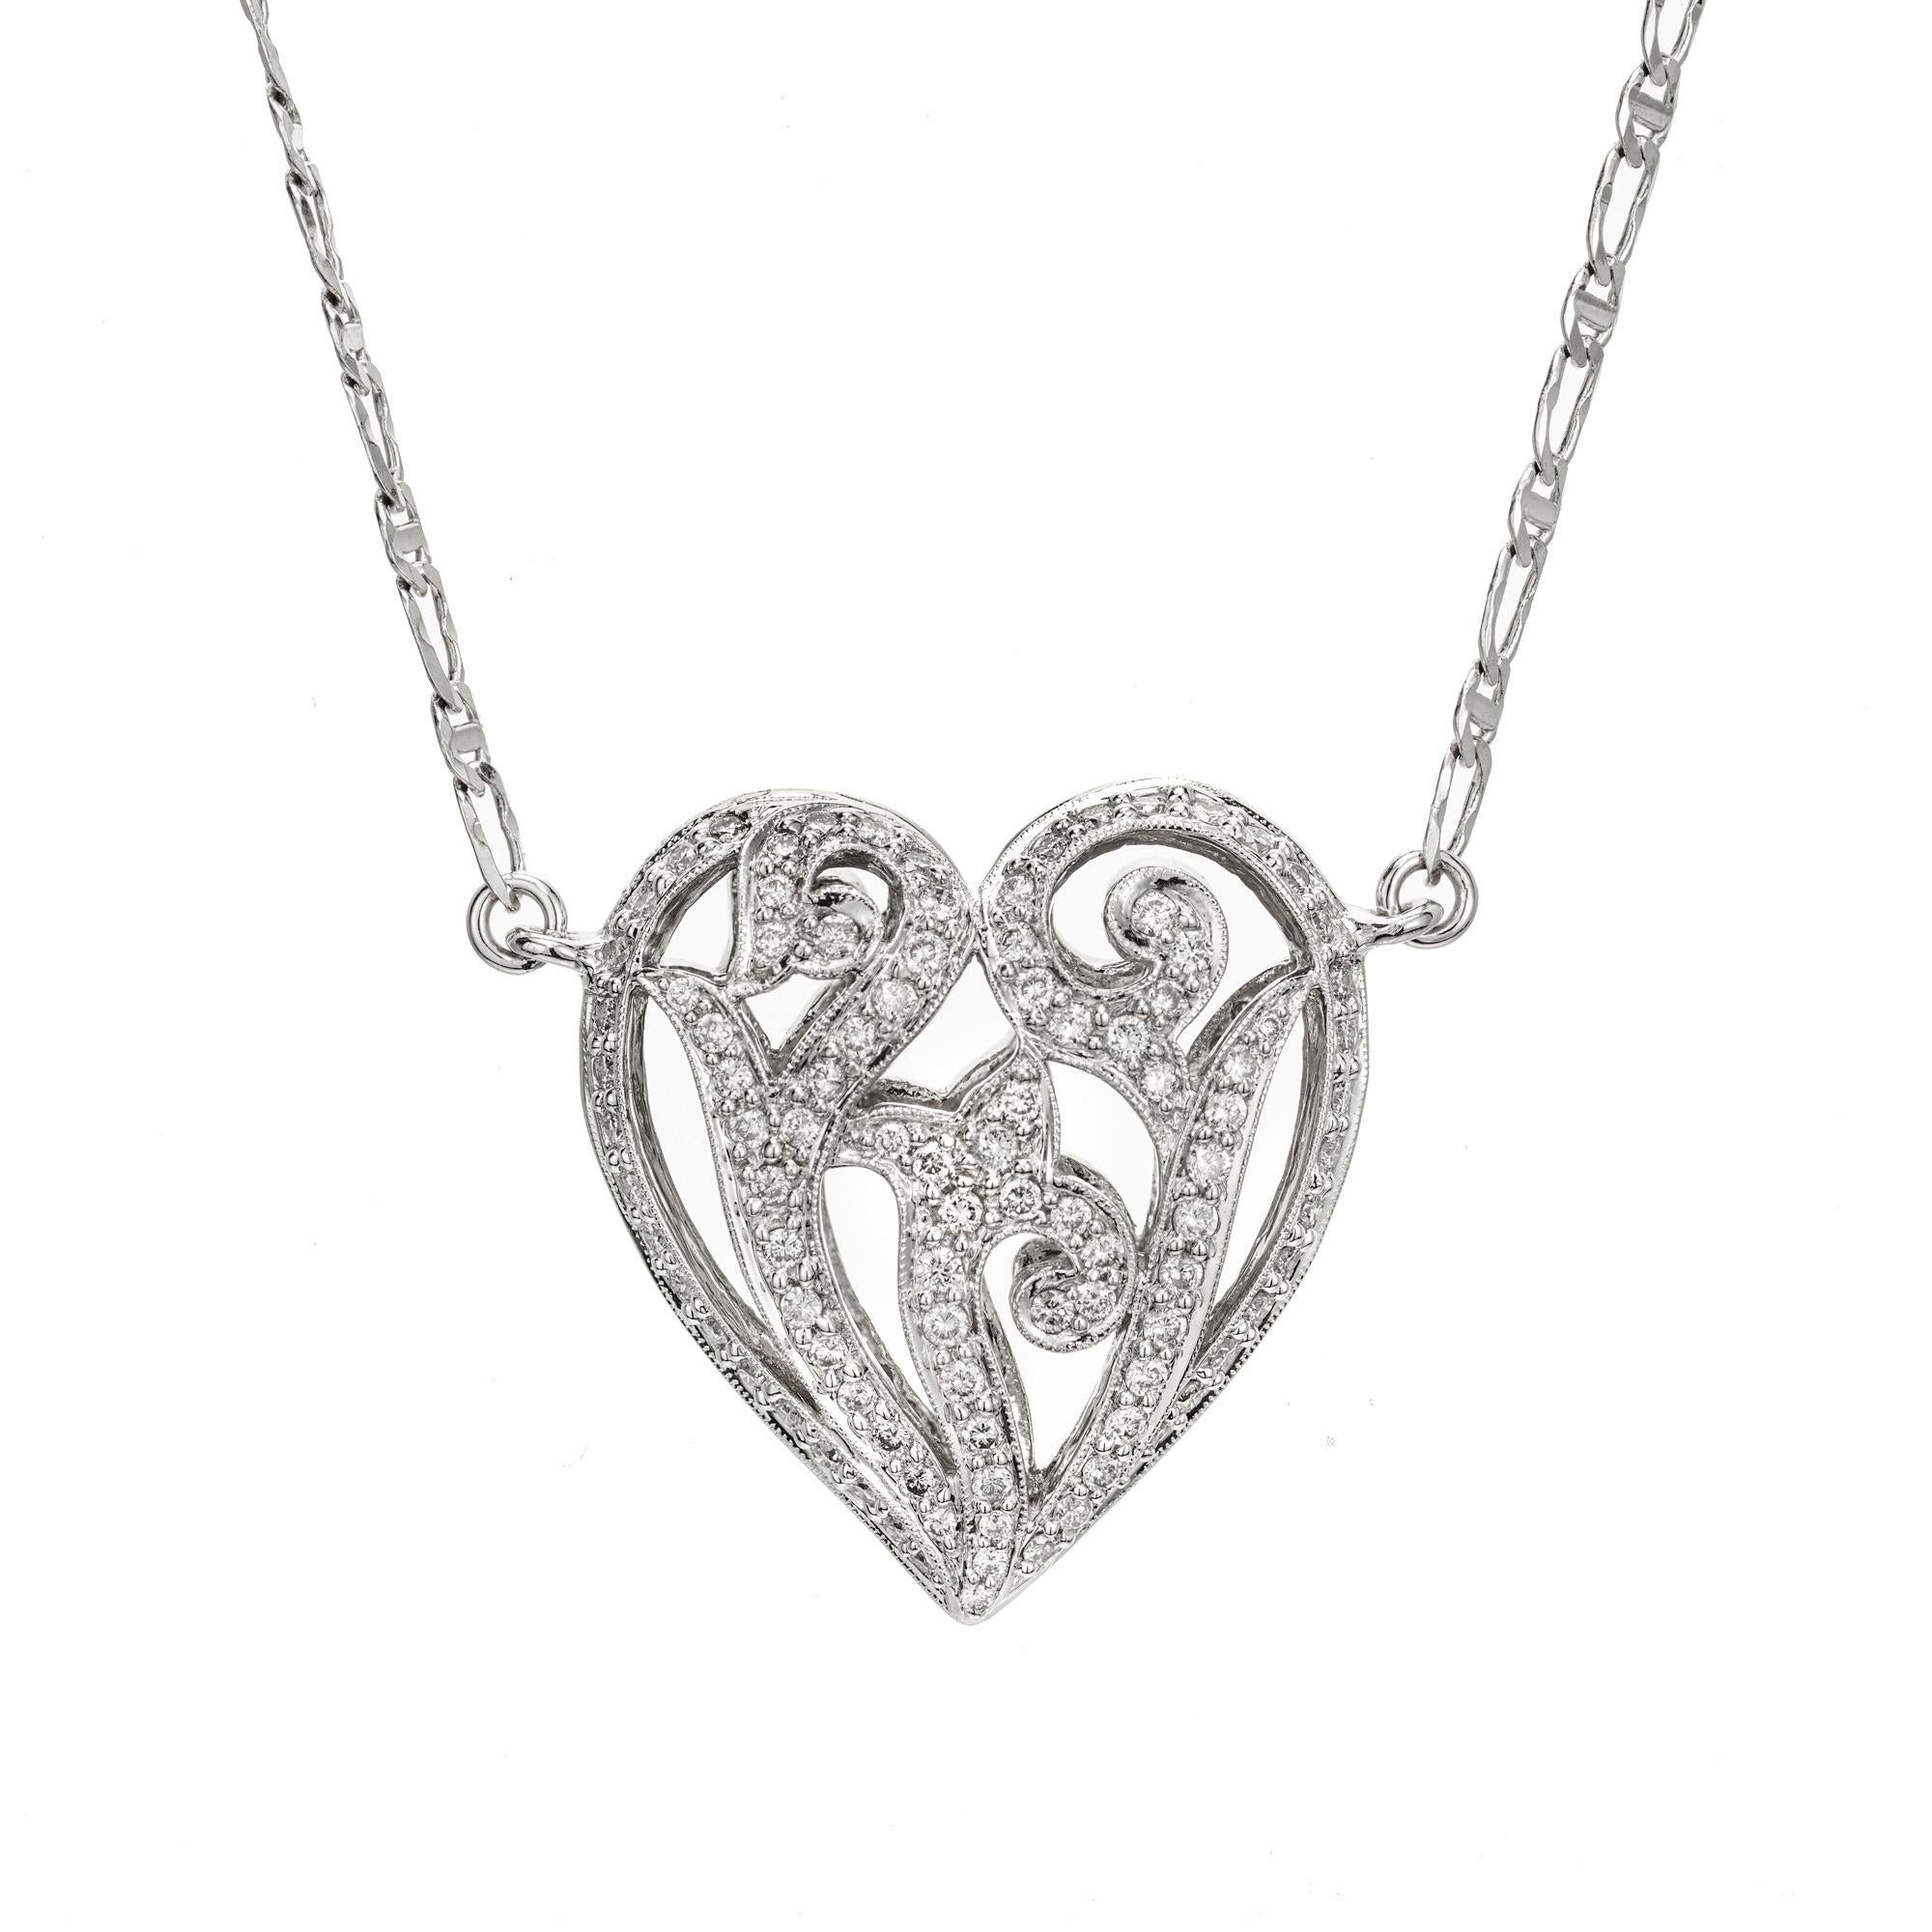 Round Cut 1.75 Carat Round Diamond White Gold Puffed Heart Pendant Necklace  For Sale